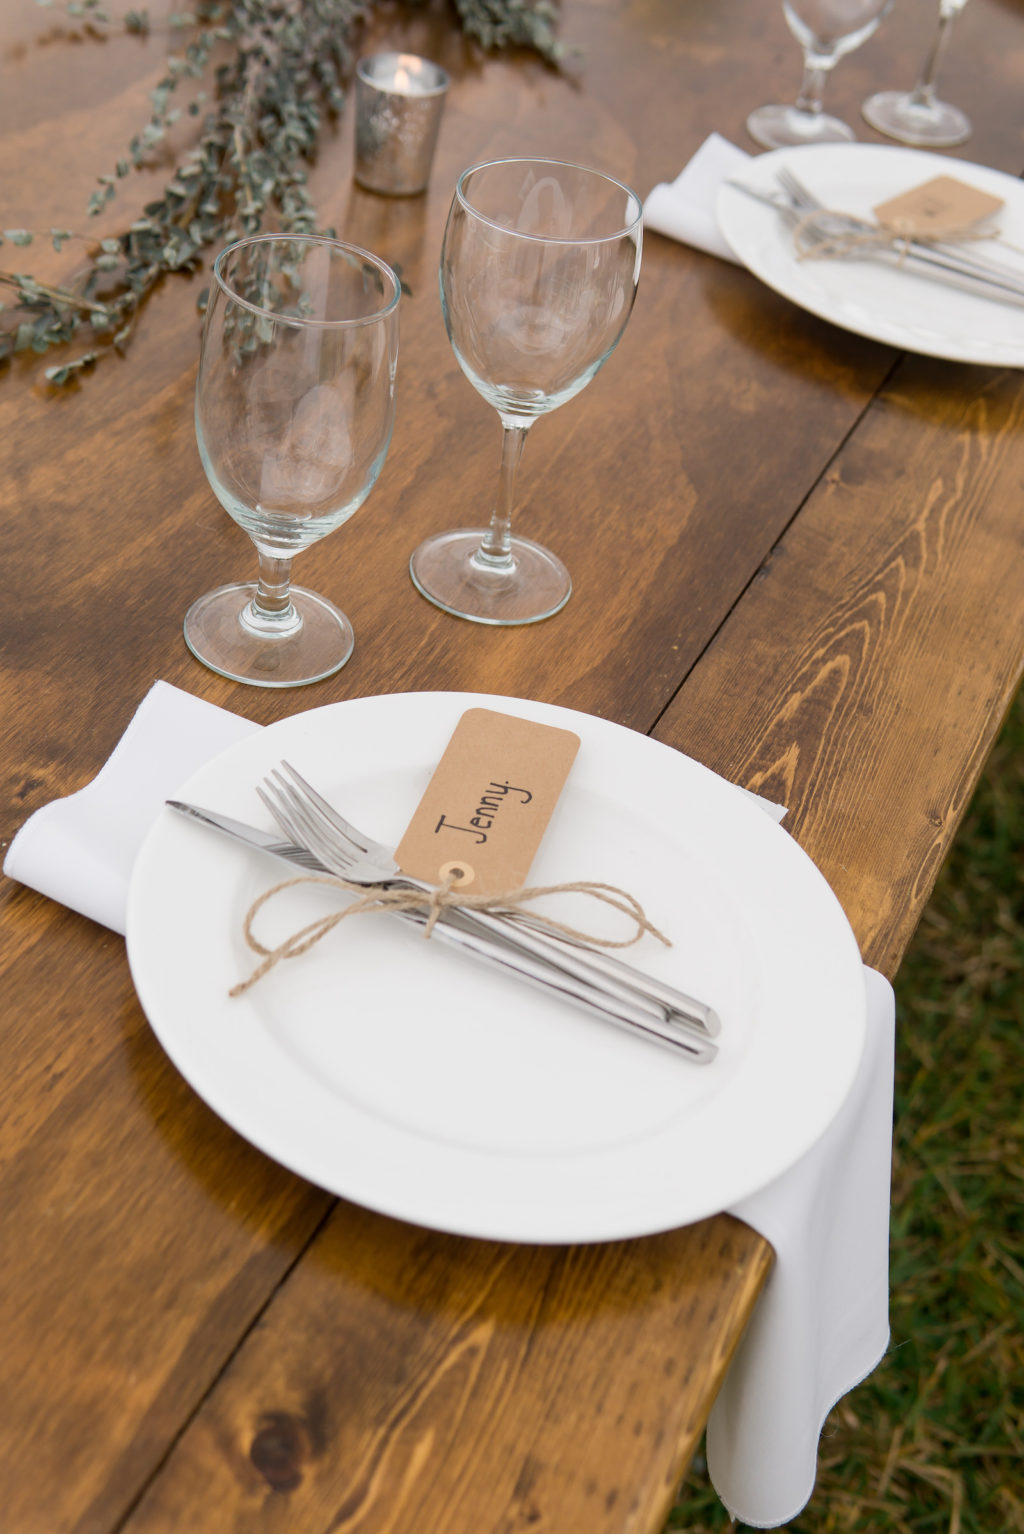 Rustic Wedding Reception Decor, Wooden Table with White Plates and Linen Napkins, Silverware and Cardstock Name Card | Tampa Bay Wedding Planner Eventfull Weddings